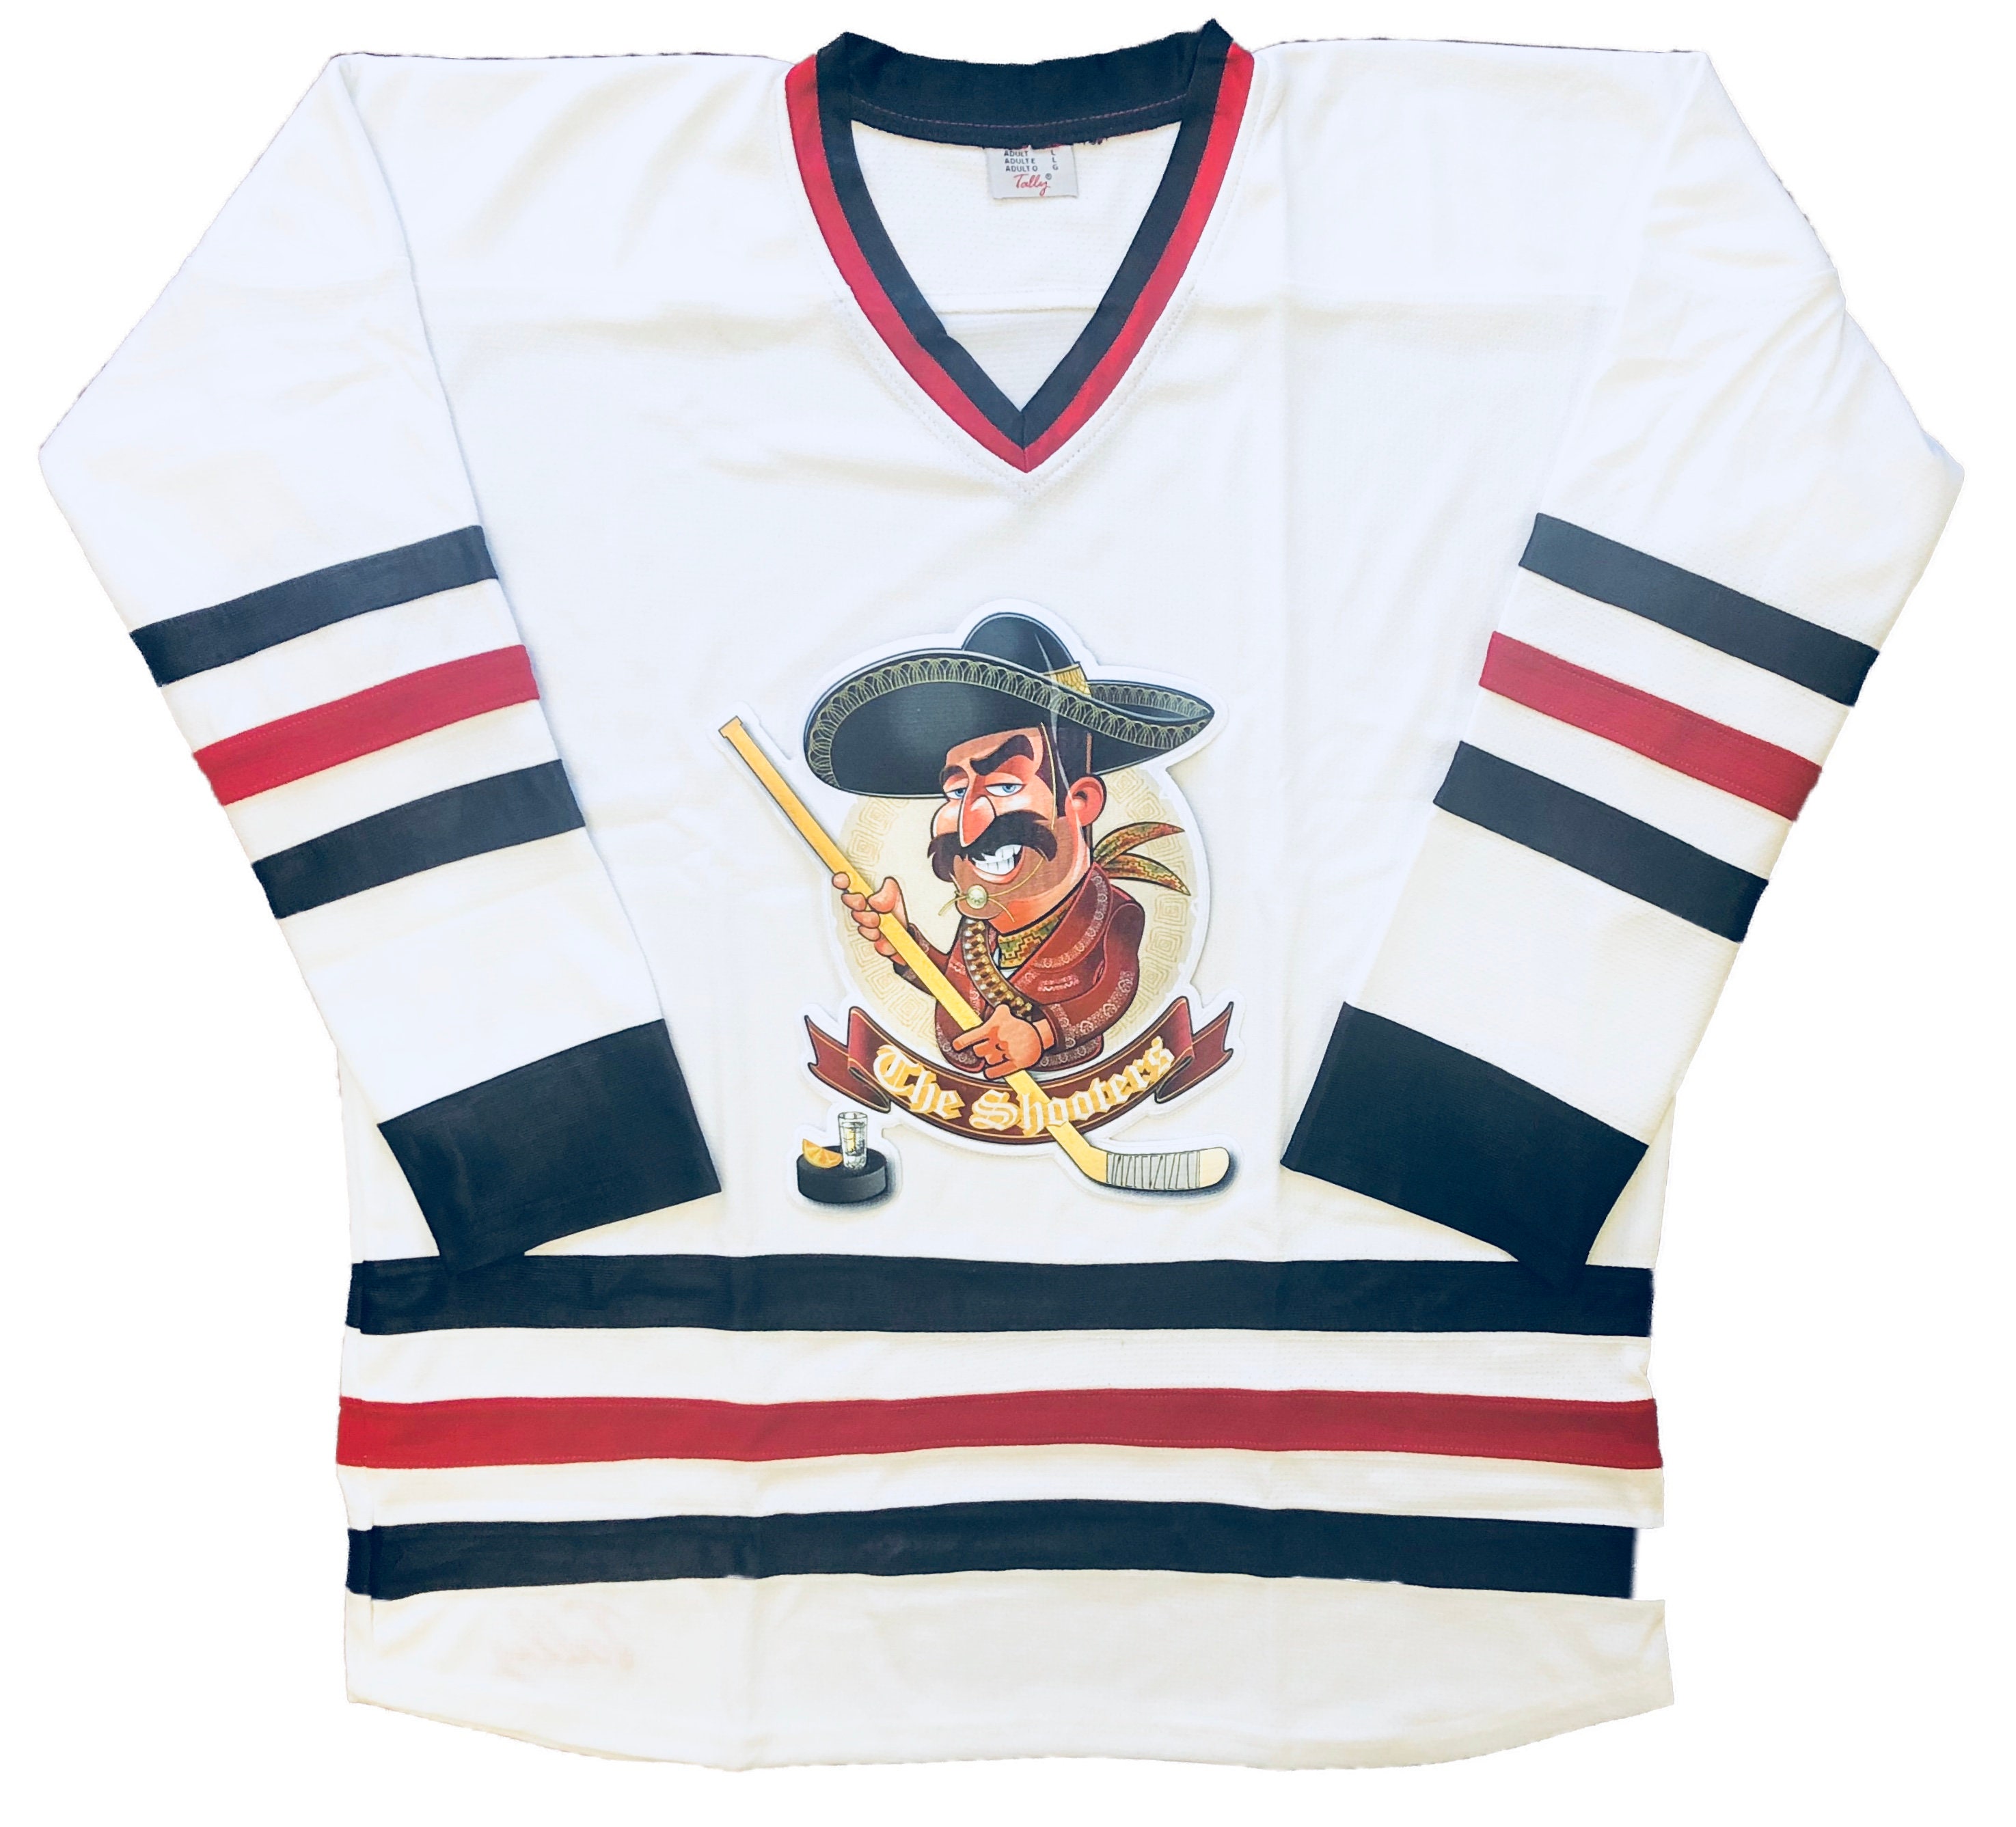 Tally Hockey Jerseys Griswold Jersey with Embroidered Twill Crests and Sleeve Numbers Adult Medium